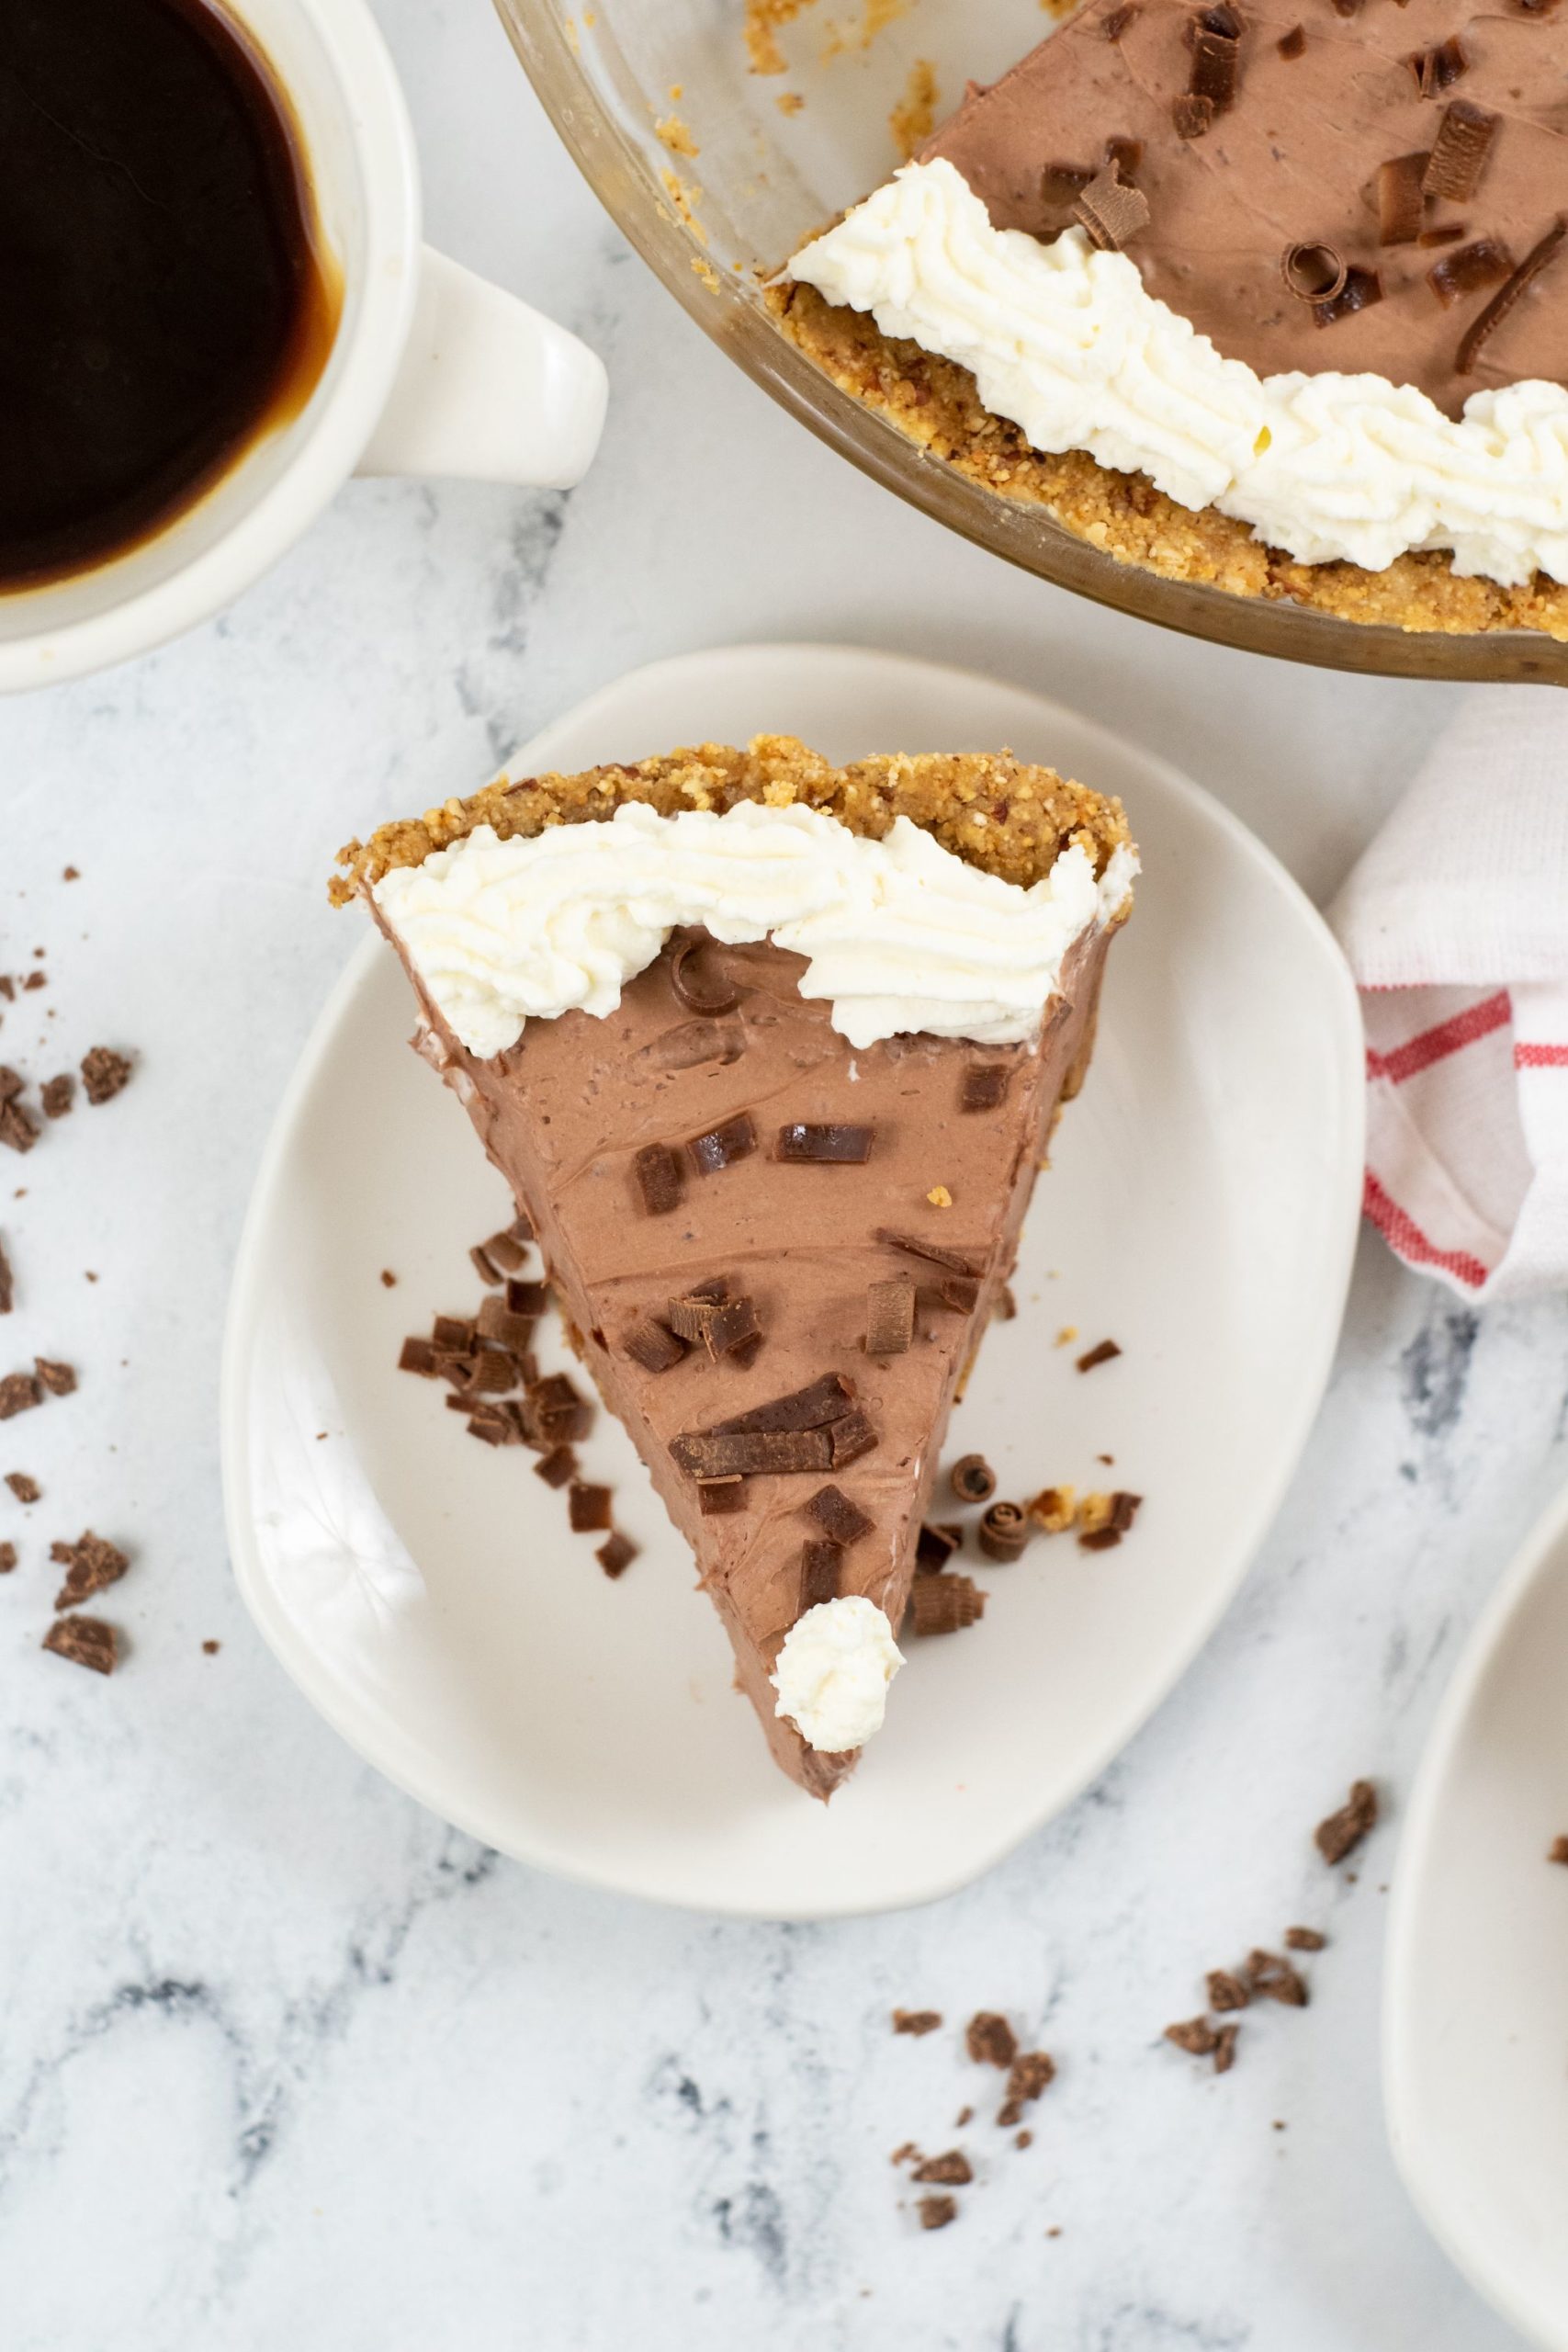 Chocolate Jello Pudding Pie with a cup of coffee and pie dish in the background.